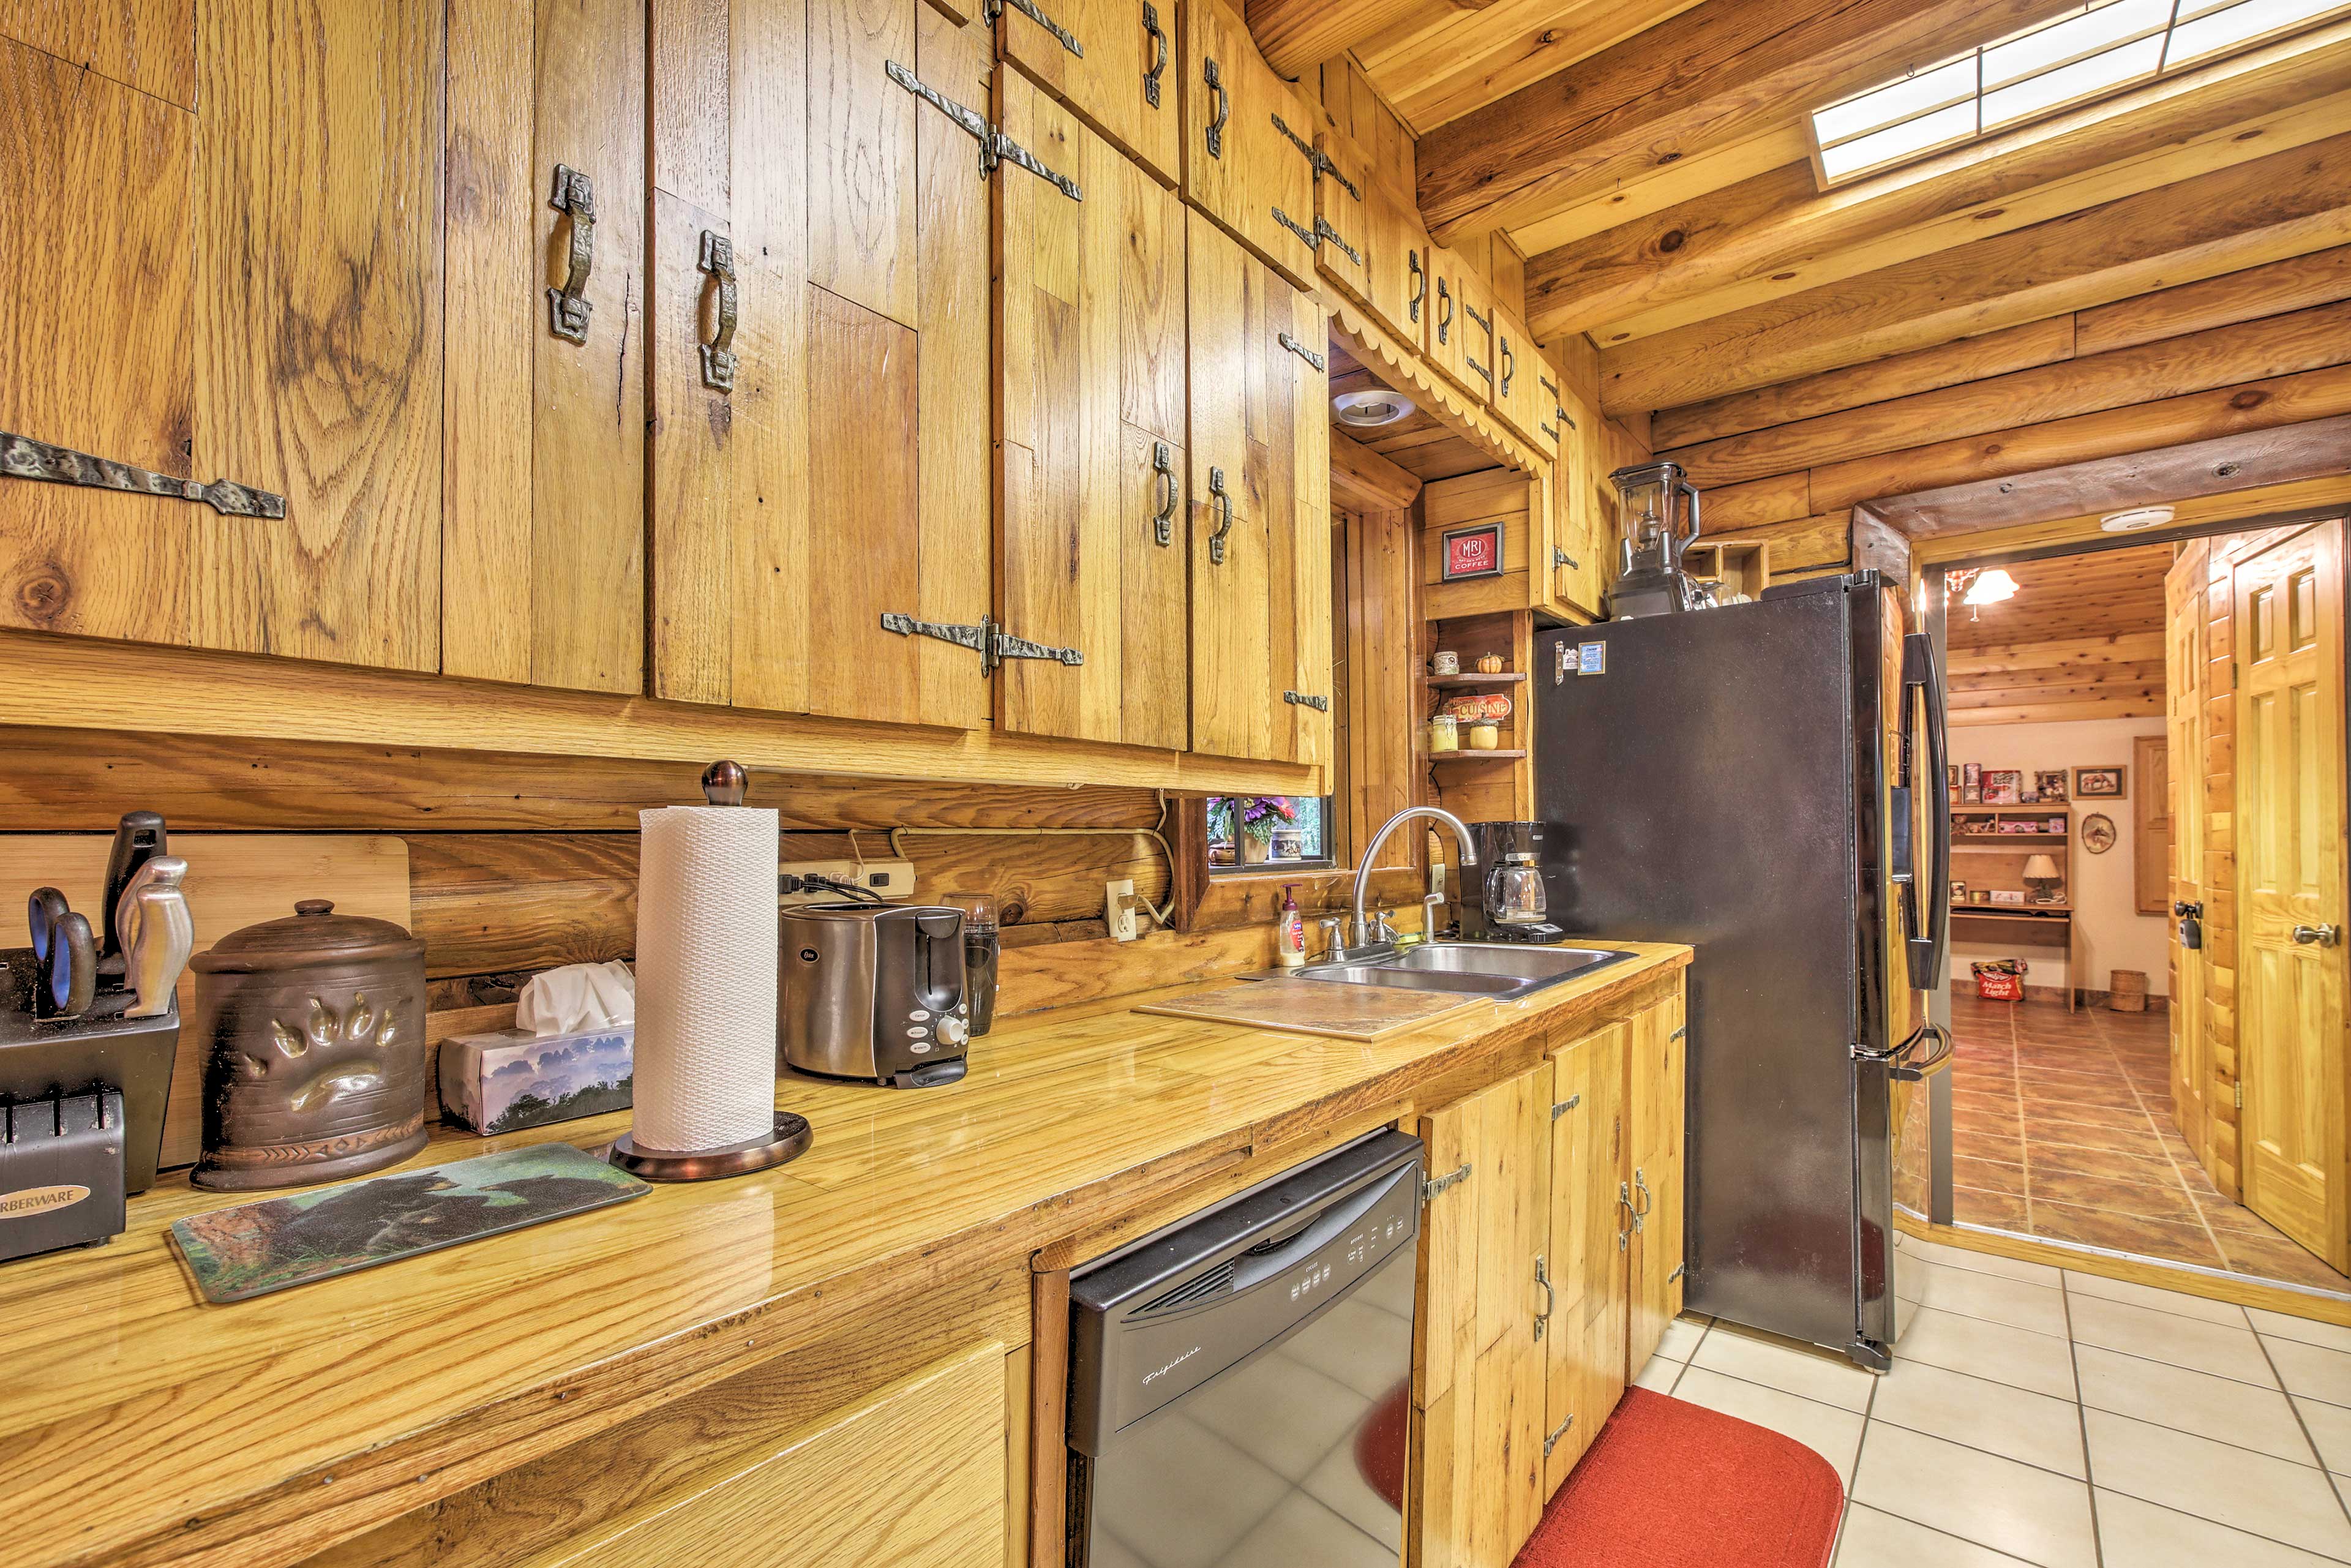 The fully equipped kitchen makes it easy to prepare meals.